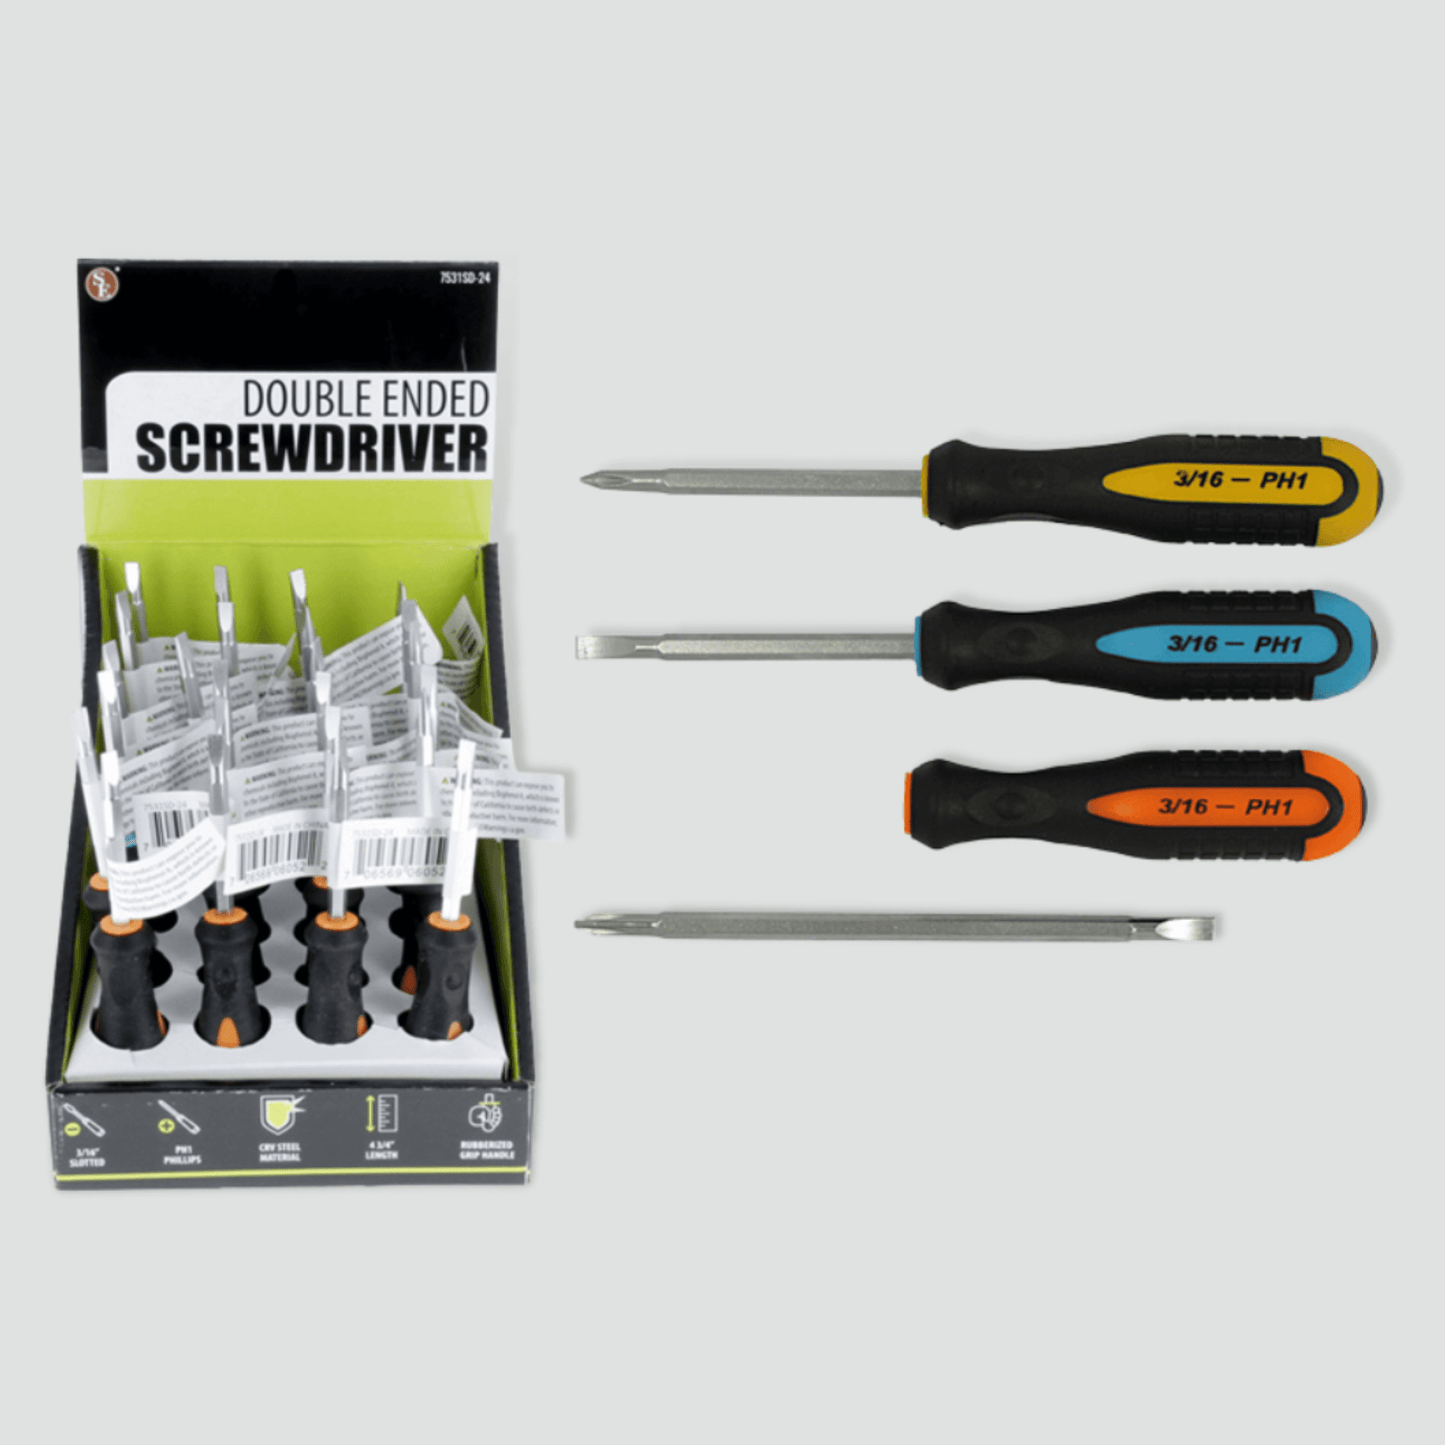 Double Ended Screwdriver with removable bit